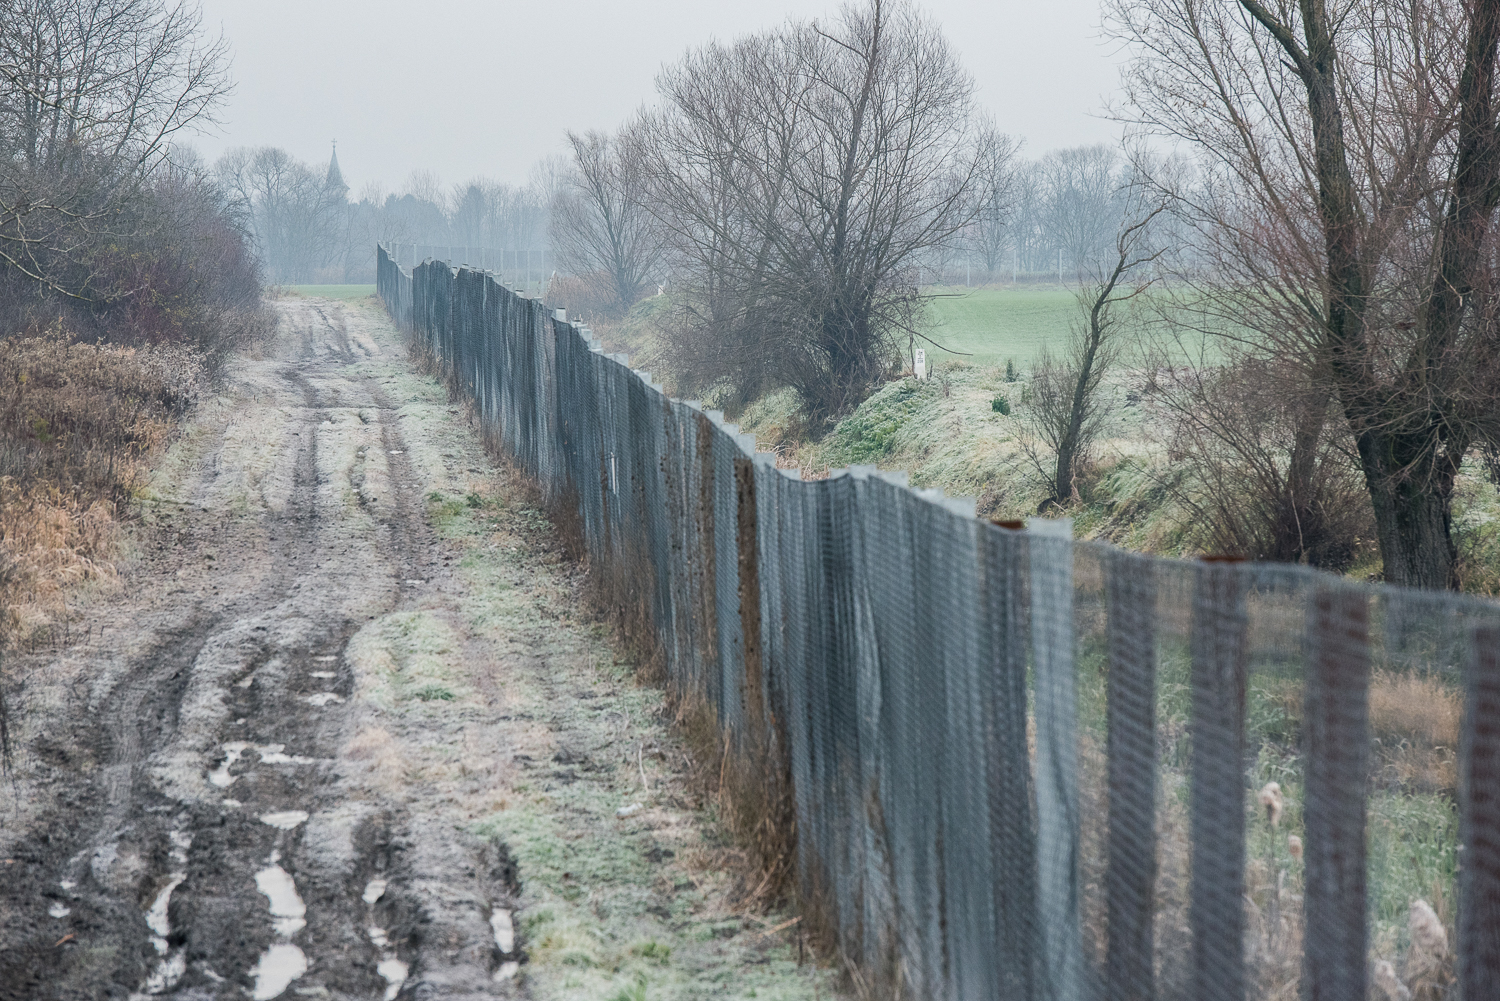  The border barrier which separates Hungary and Croatia near Illocska, Hungary 2 December 2017. The fence was constructed in the middle of the European migration crisis in 2015, with the aim to ensure border security by preventing immigrants from ent